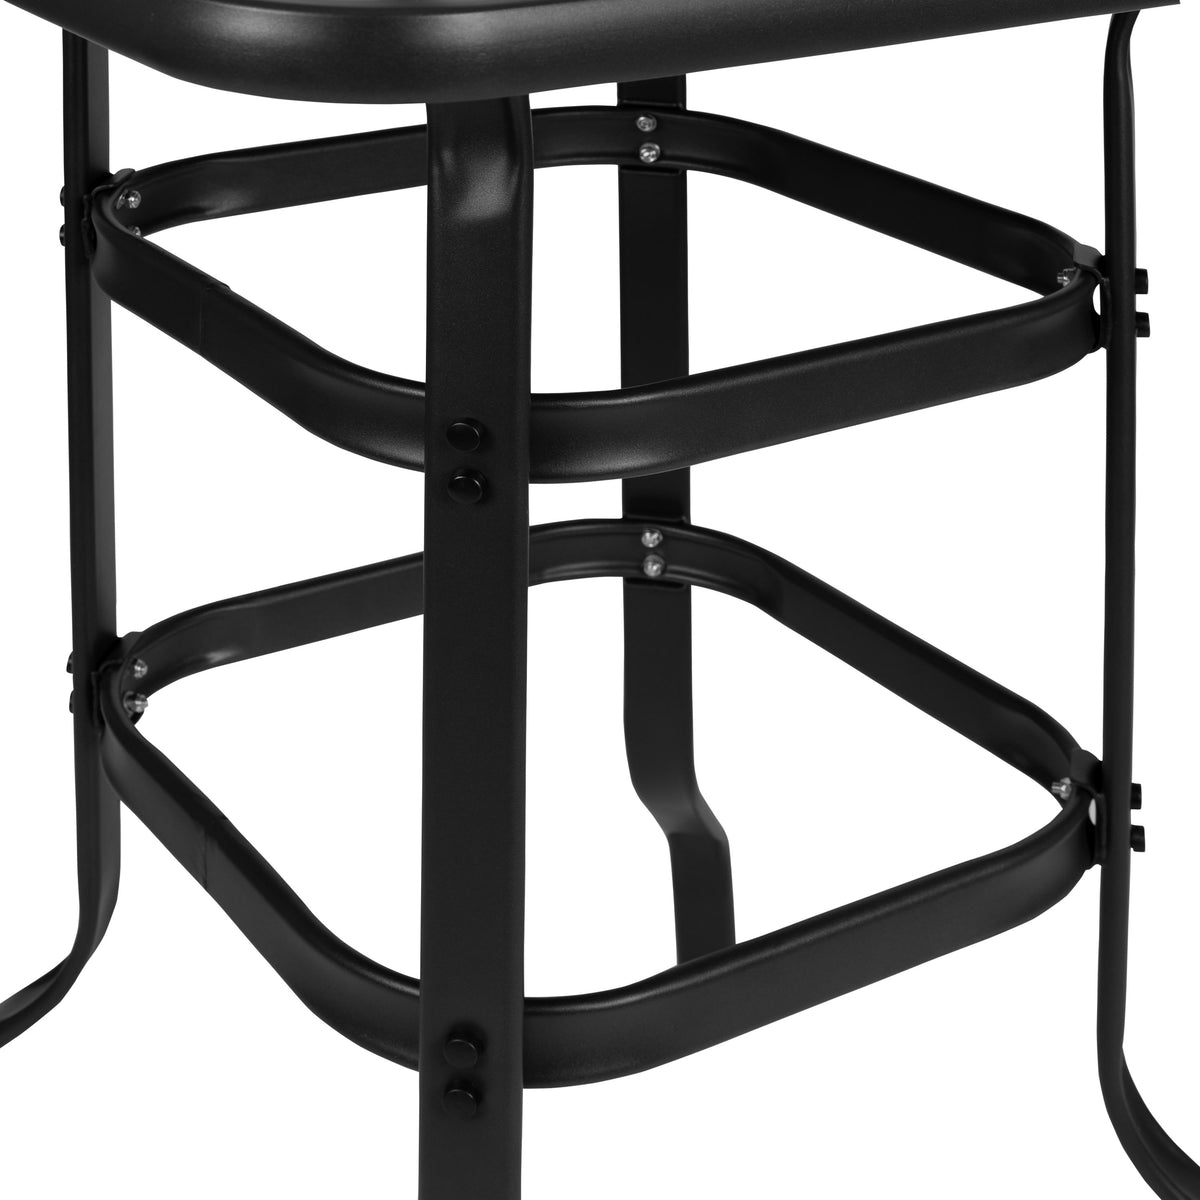 Navy |#| 3 Piece Outdoor Bar Height Set-Glass Patio Bar Table-Navy All-Weather Barstools